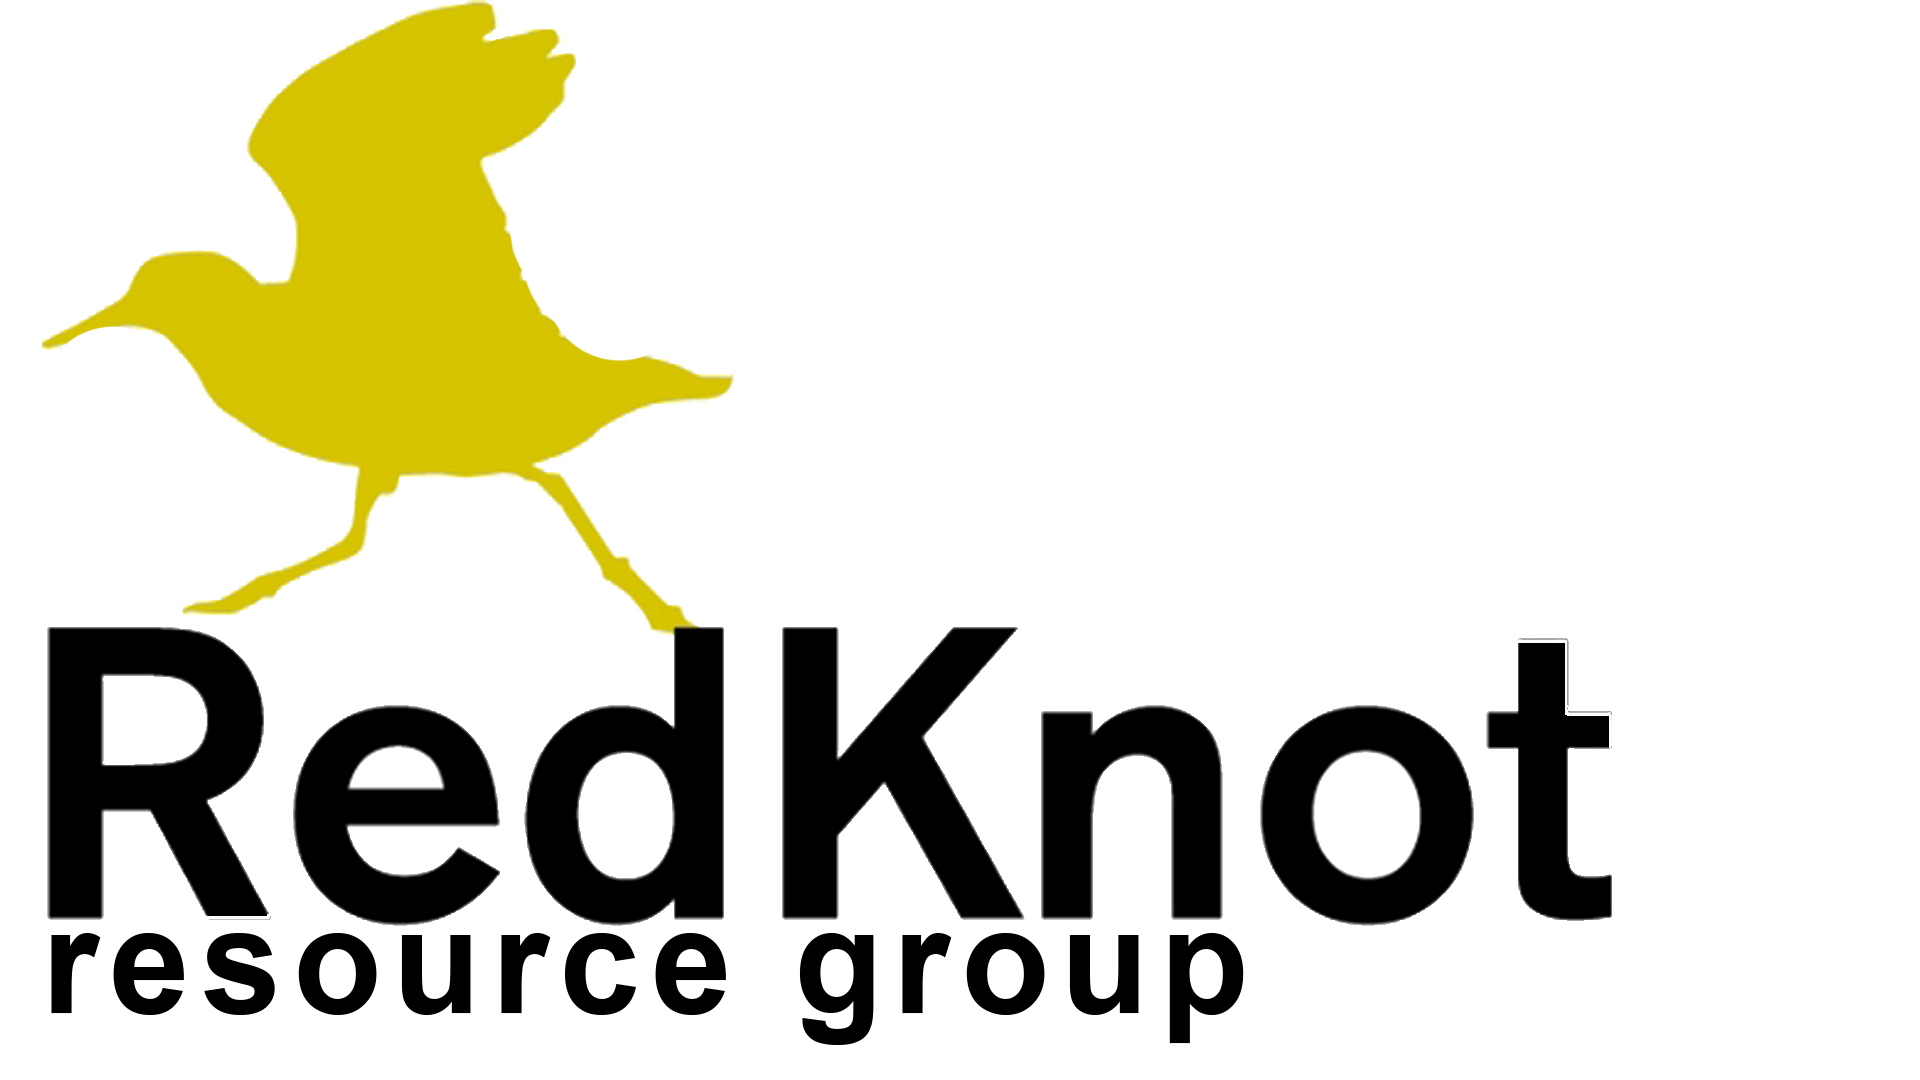 Red Knot Logo - RedKnot Resource Group |